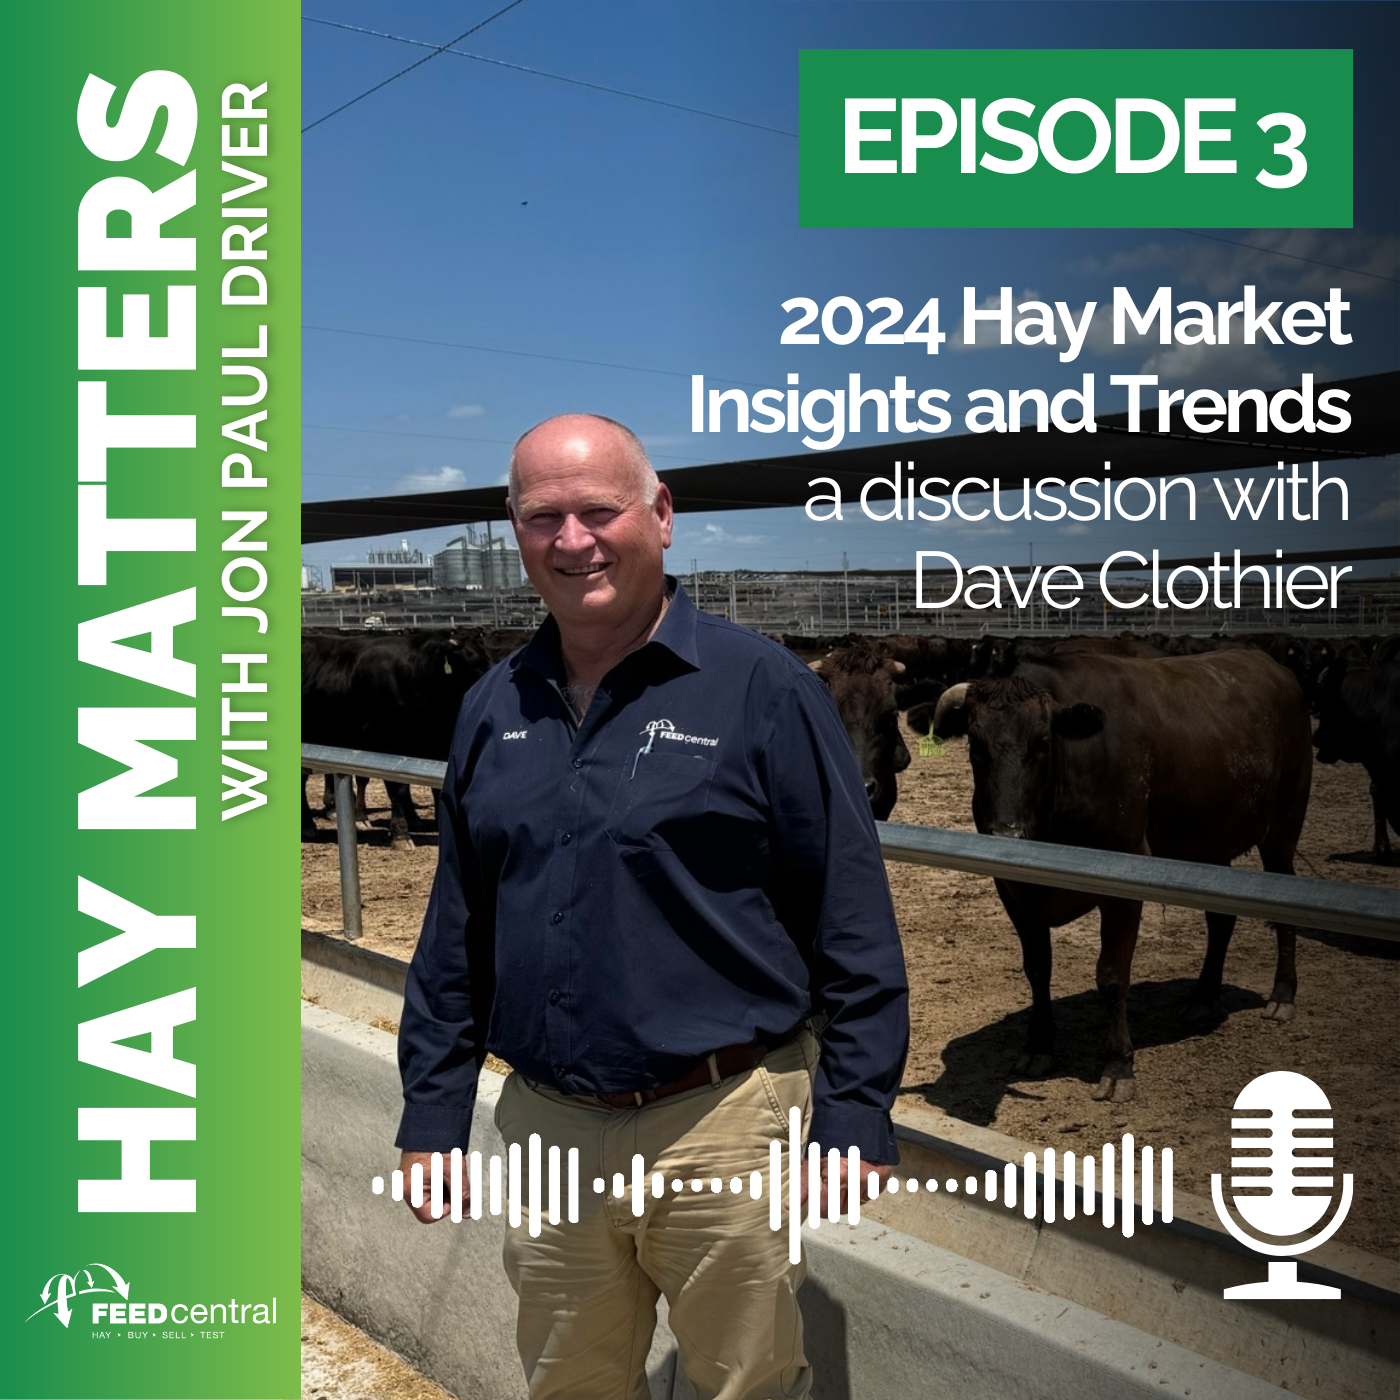 2024 Hay Market Insights and Trends: a discussion with Dave Clothier